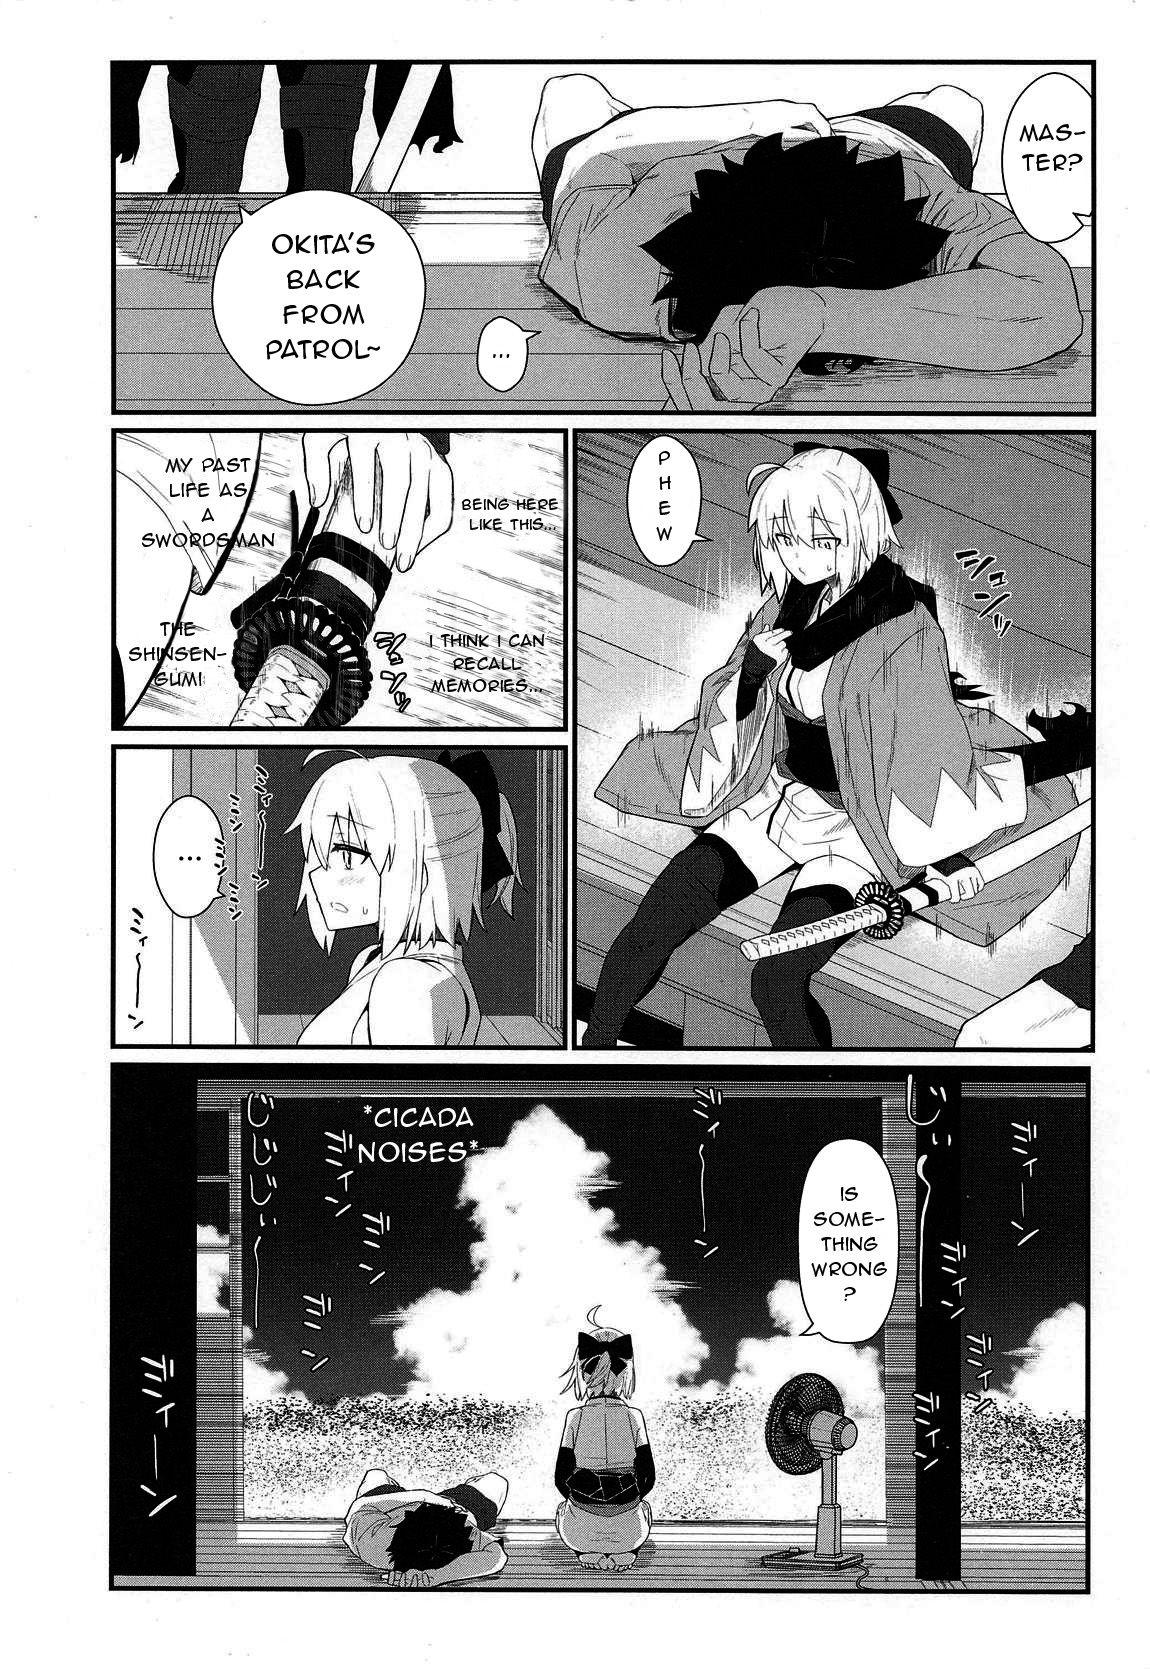 Pierced GIRLFriend's 17 - Fate grand order Submissive - Page 3